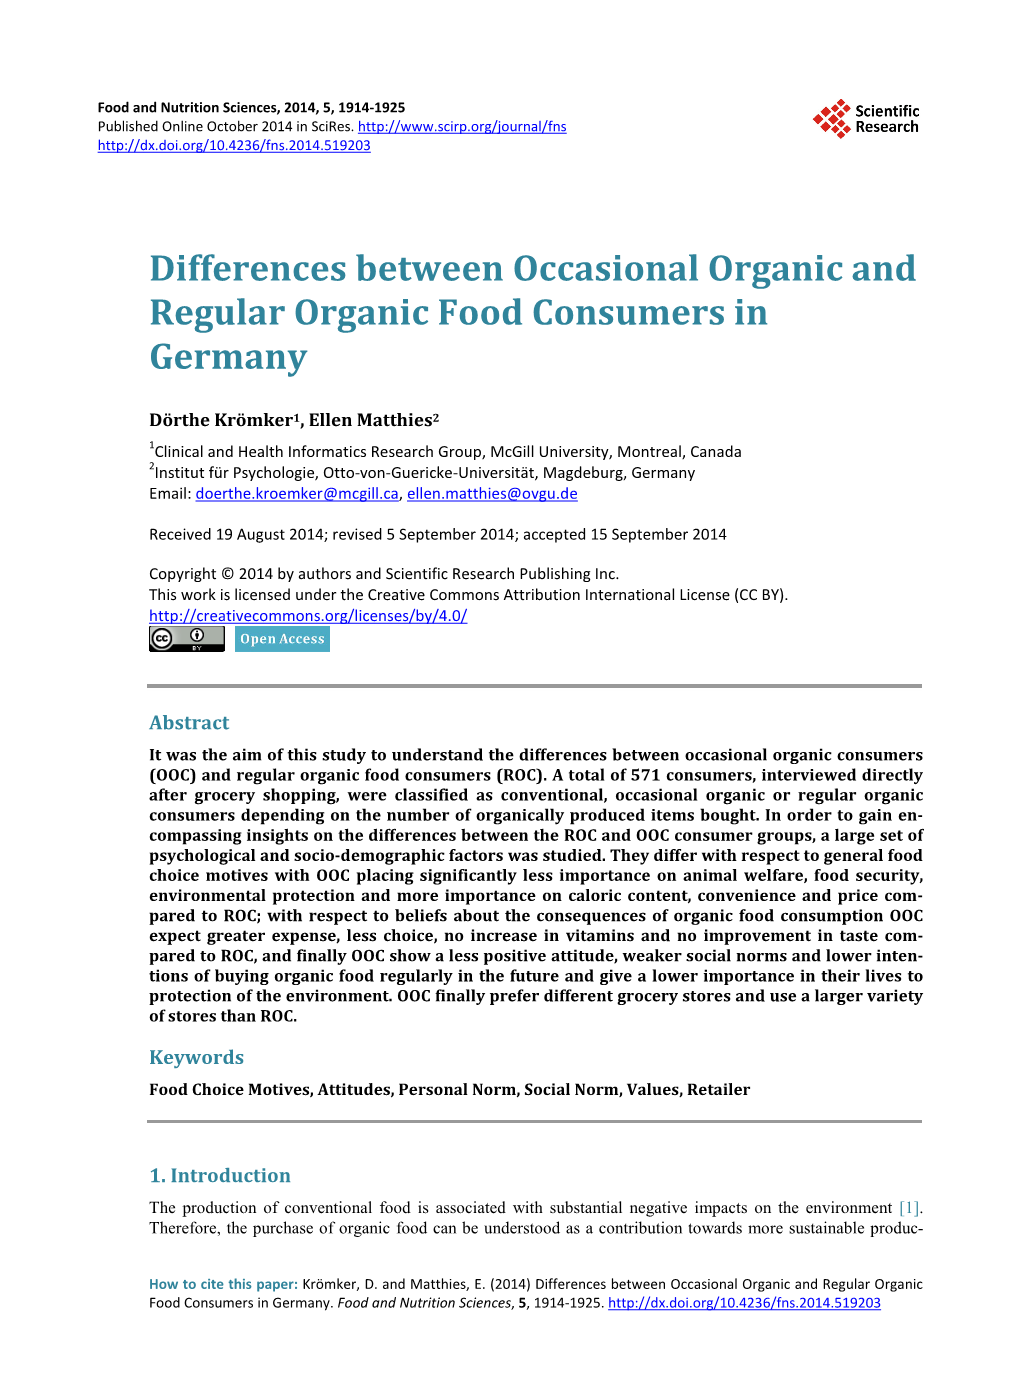 Differences Between Occasional Organic and Regular Organic Food Consumers in Germany